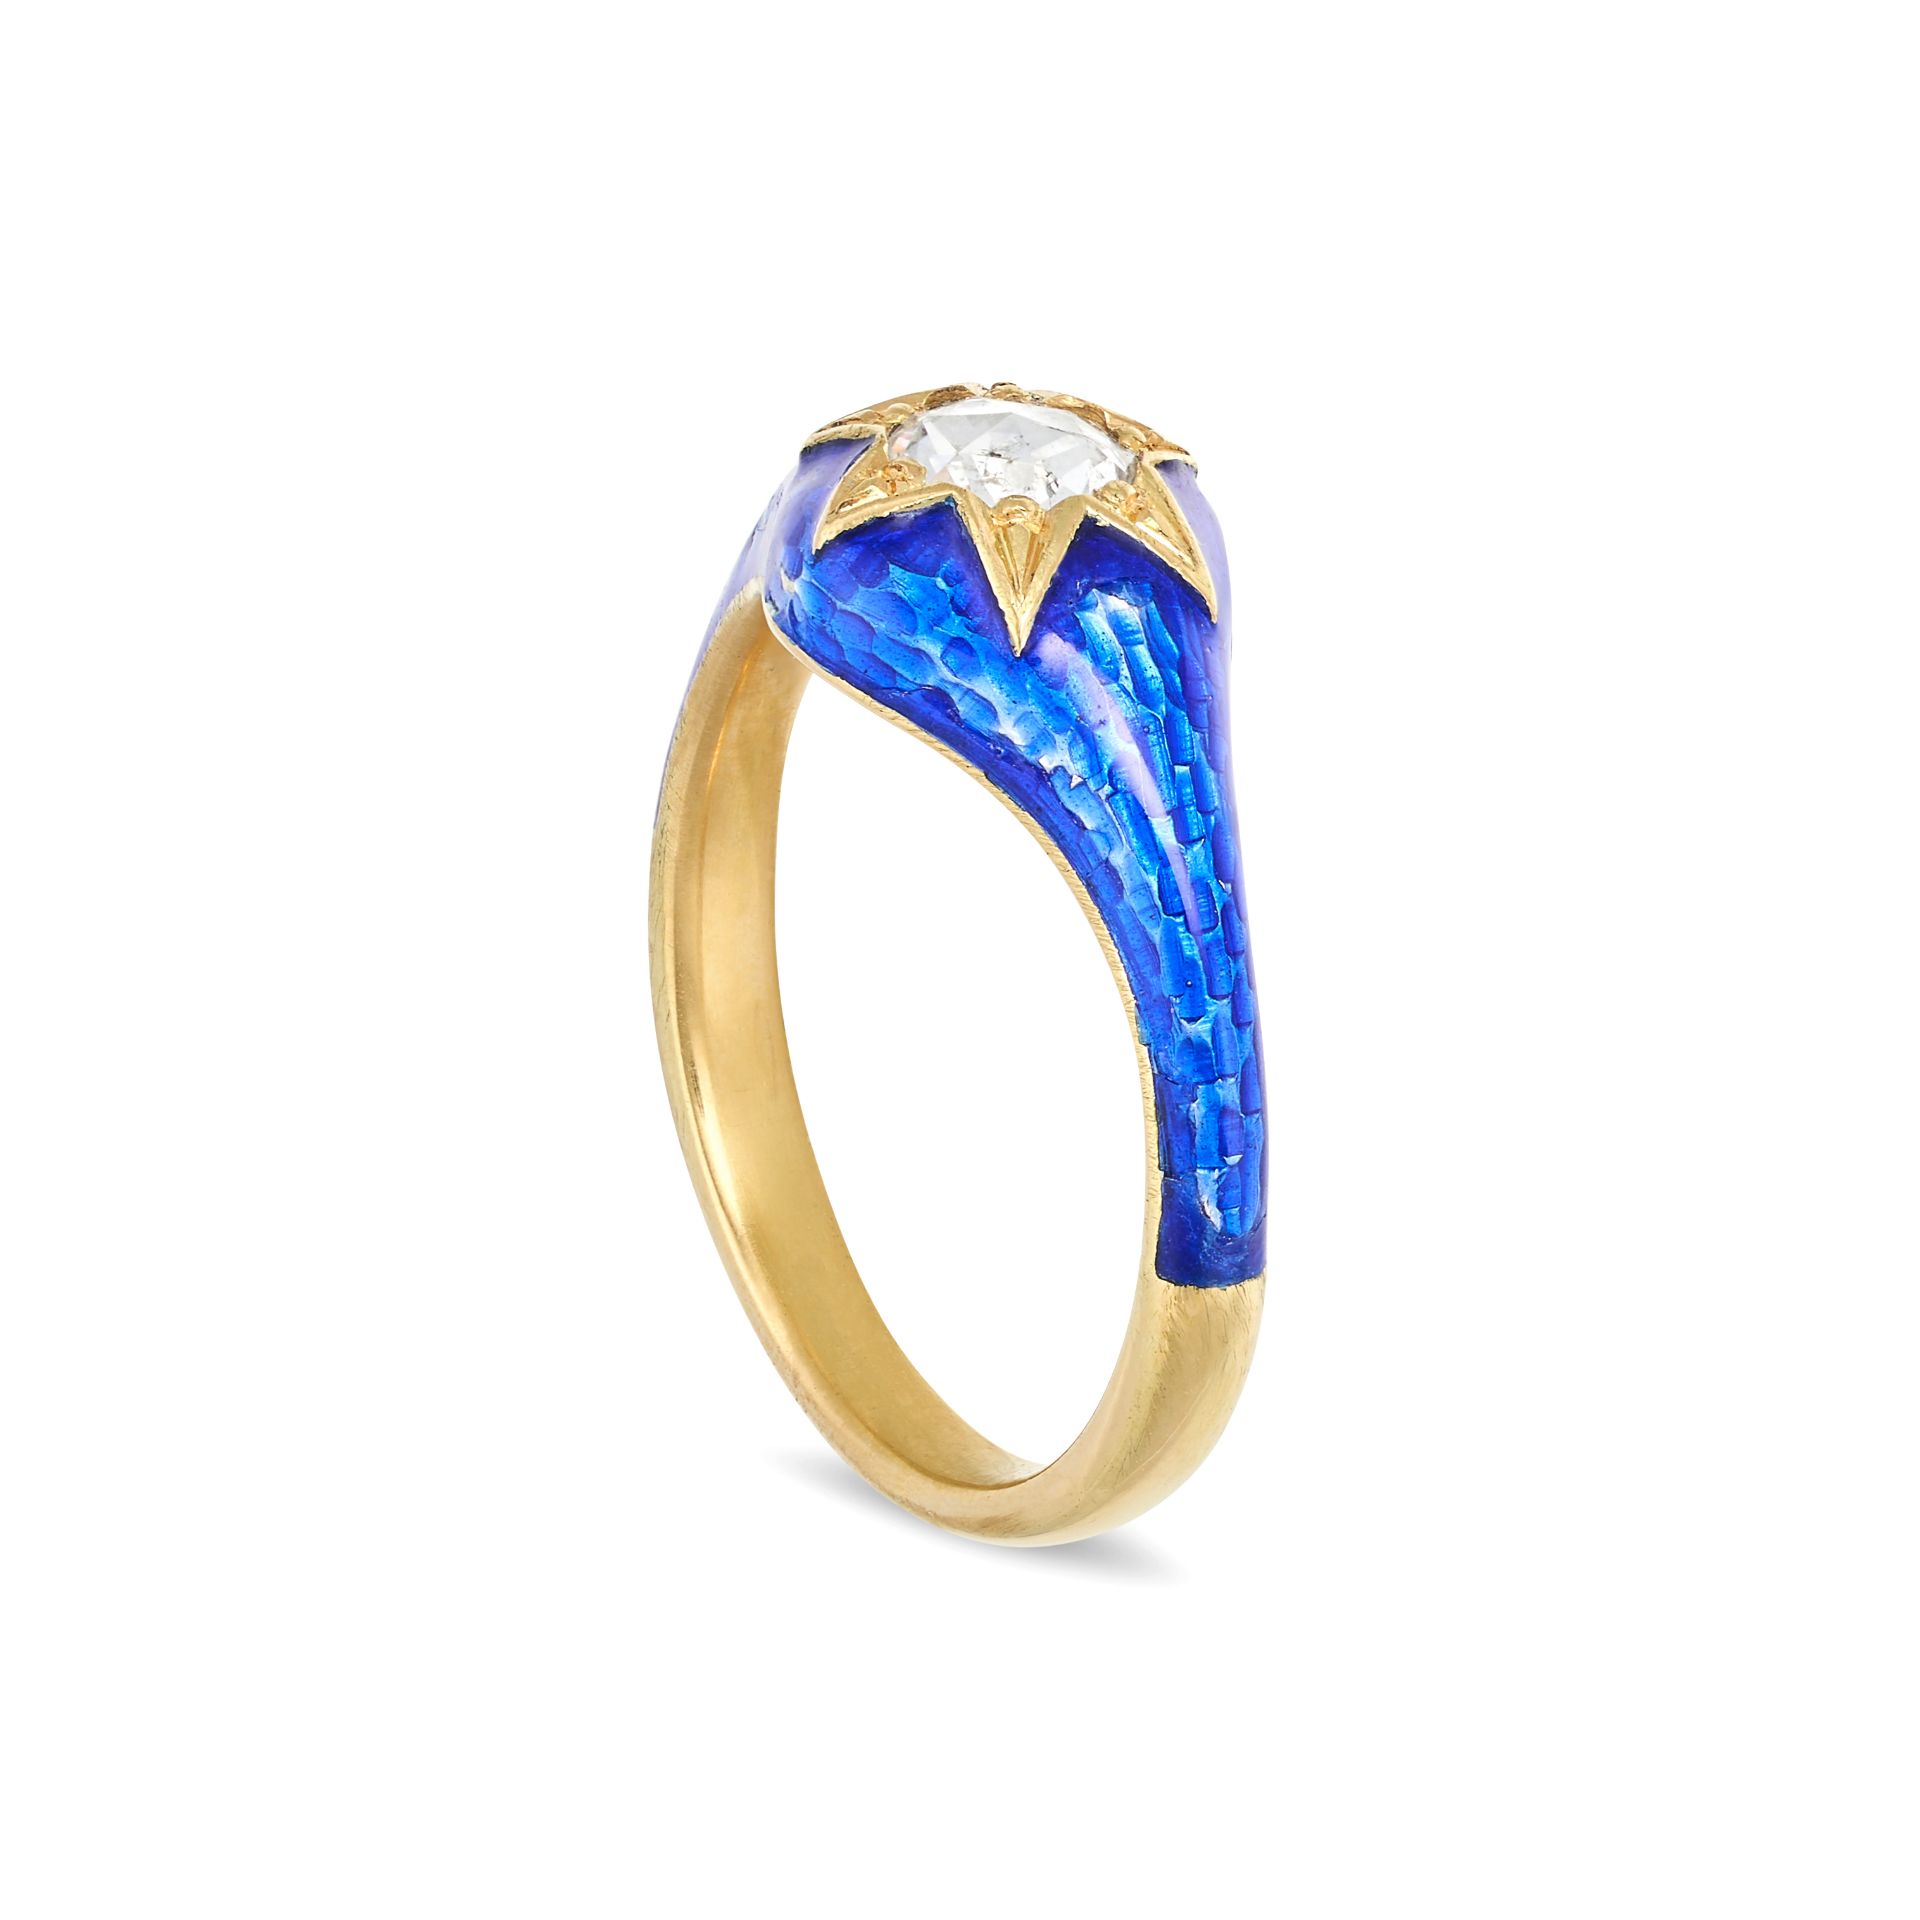 AN ENAMEL AND DIAMOND RING in yellow gold, the ring decorated with blue enamel set to the centre ... - Image 2 of 2